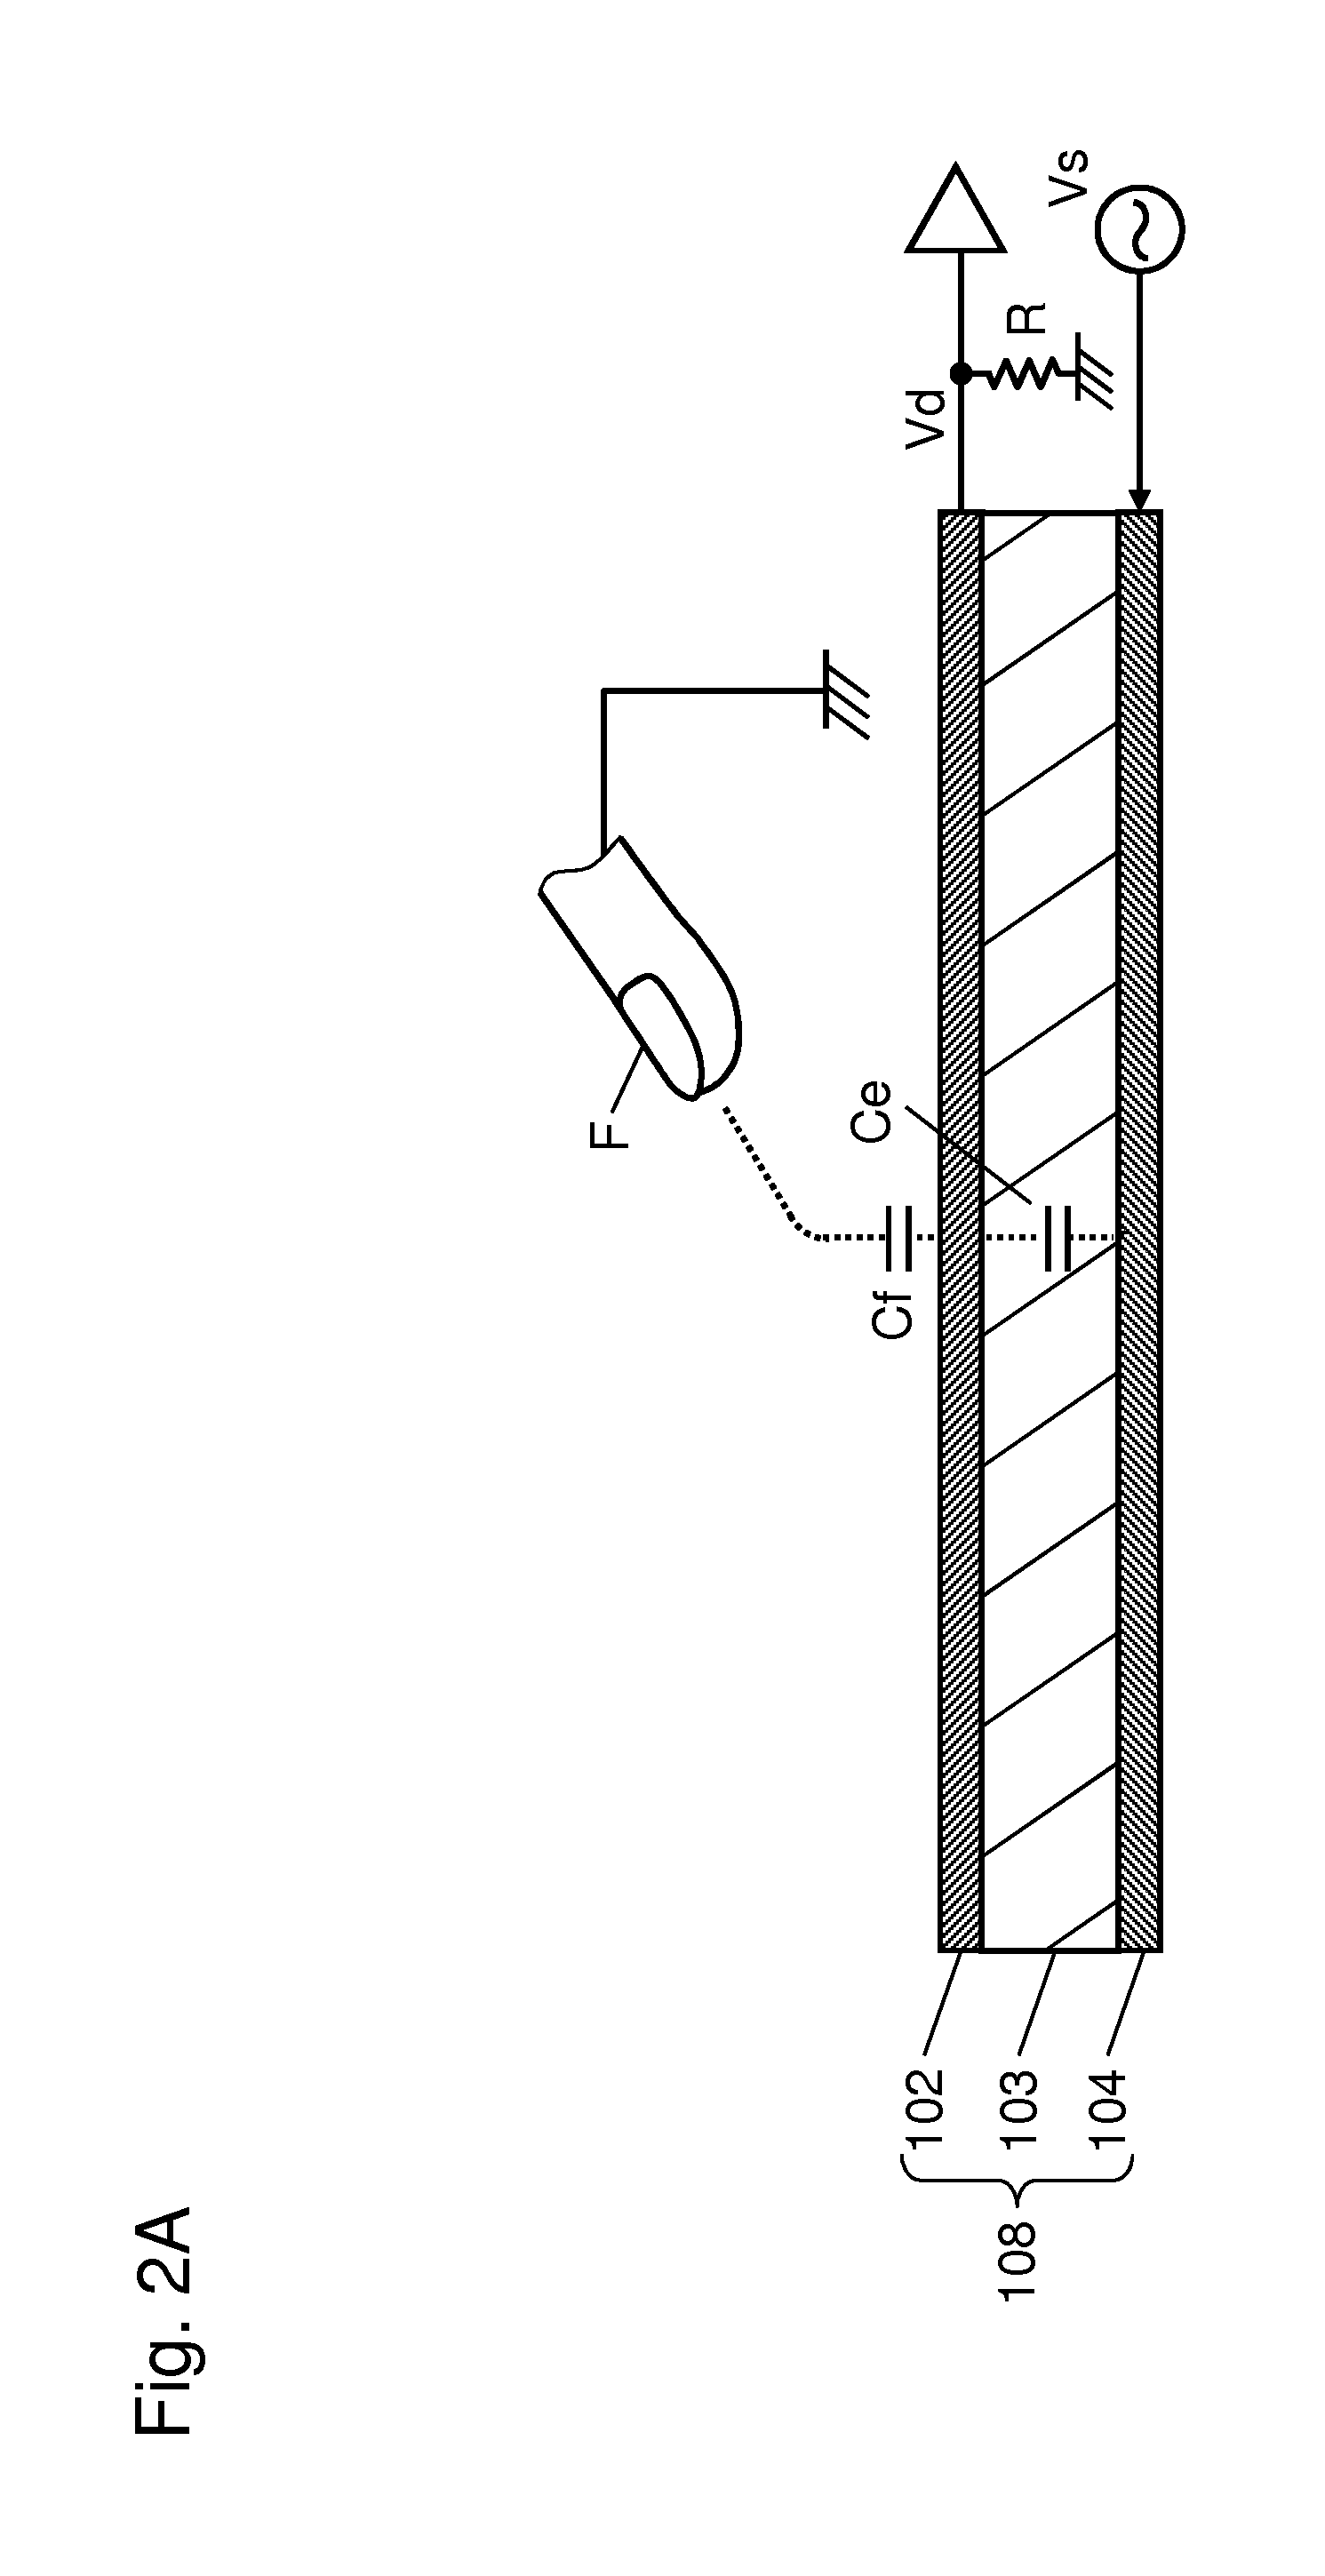 Touch-panel device